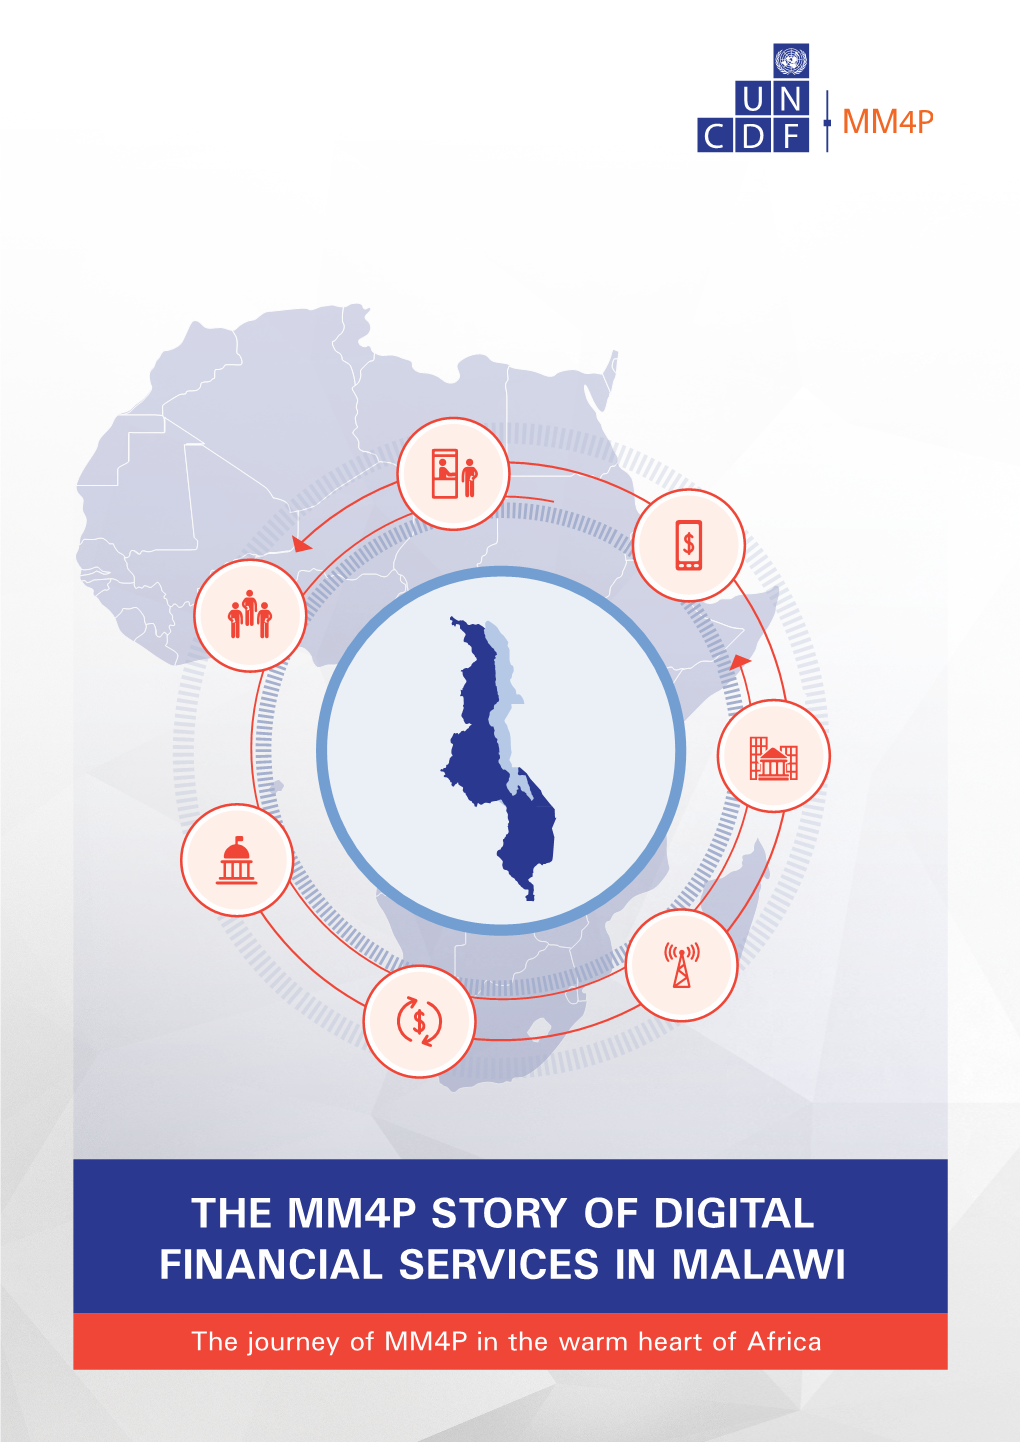 The Mm4p Story of Digital Financial Services in Malawi